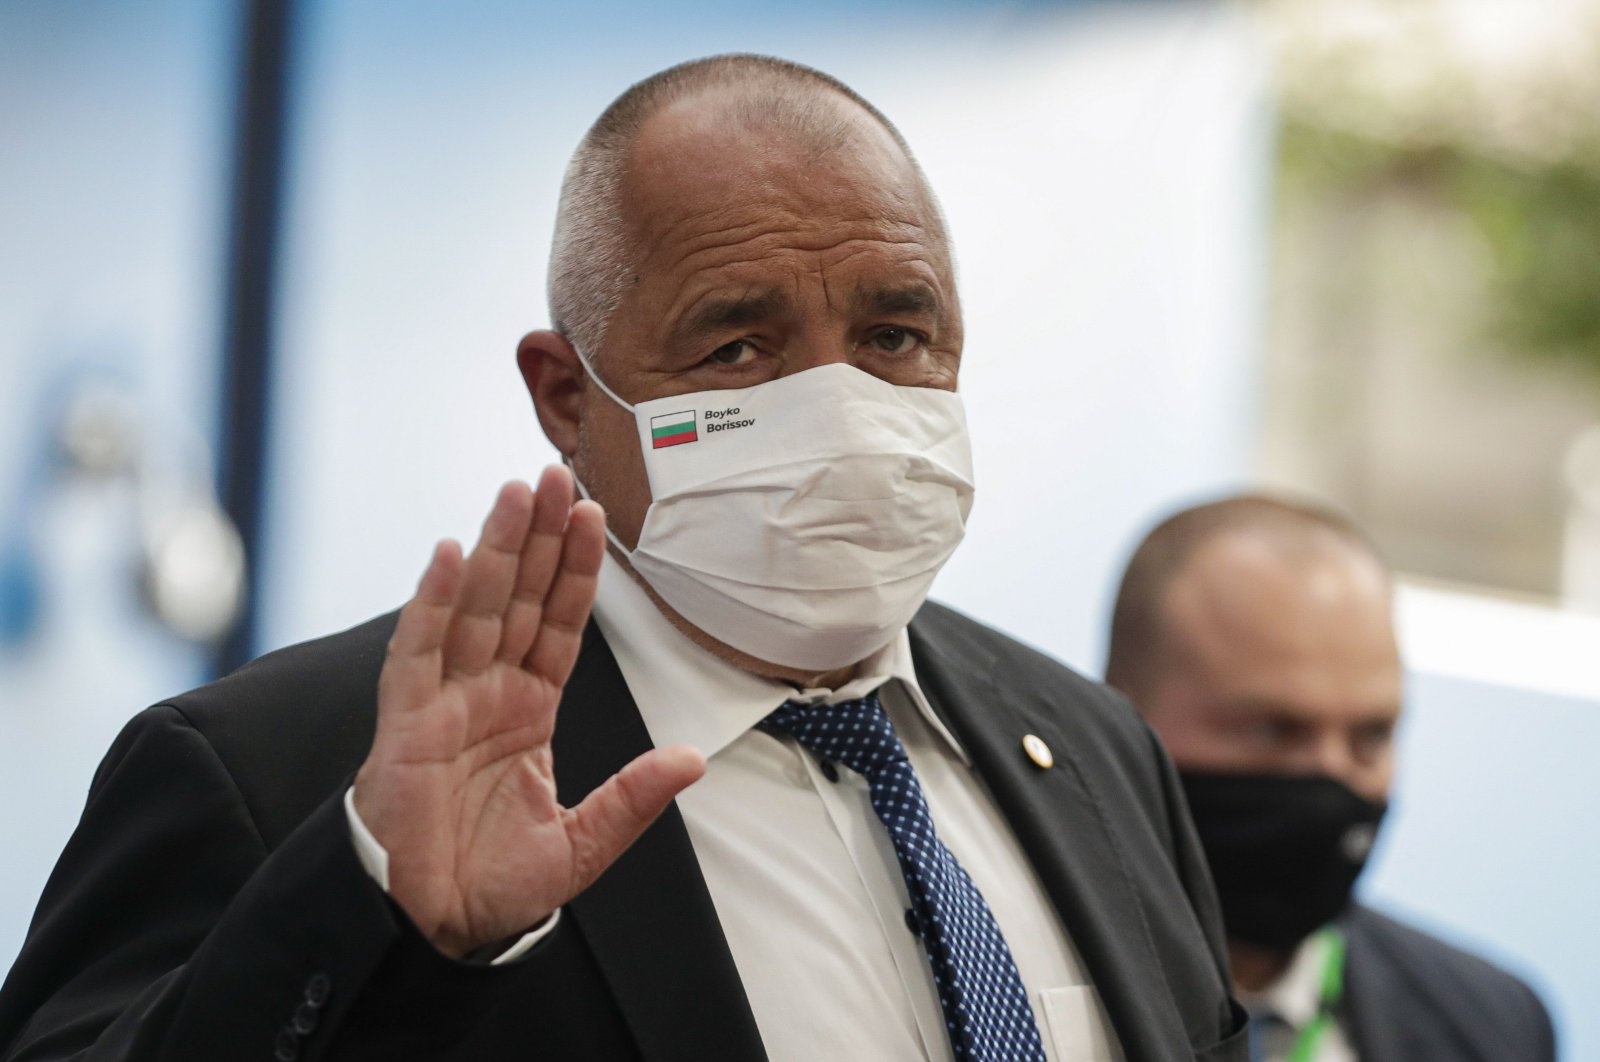 Bulgaria's Prime Minister Boyko Borissov, wearing a protective face mask, waves as he arrives for the fourth day of an EU summit at the European Council building in Brussels, on July 20, 2020. (AFP Photo)